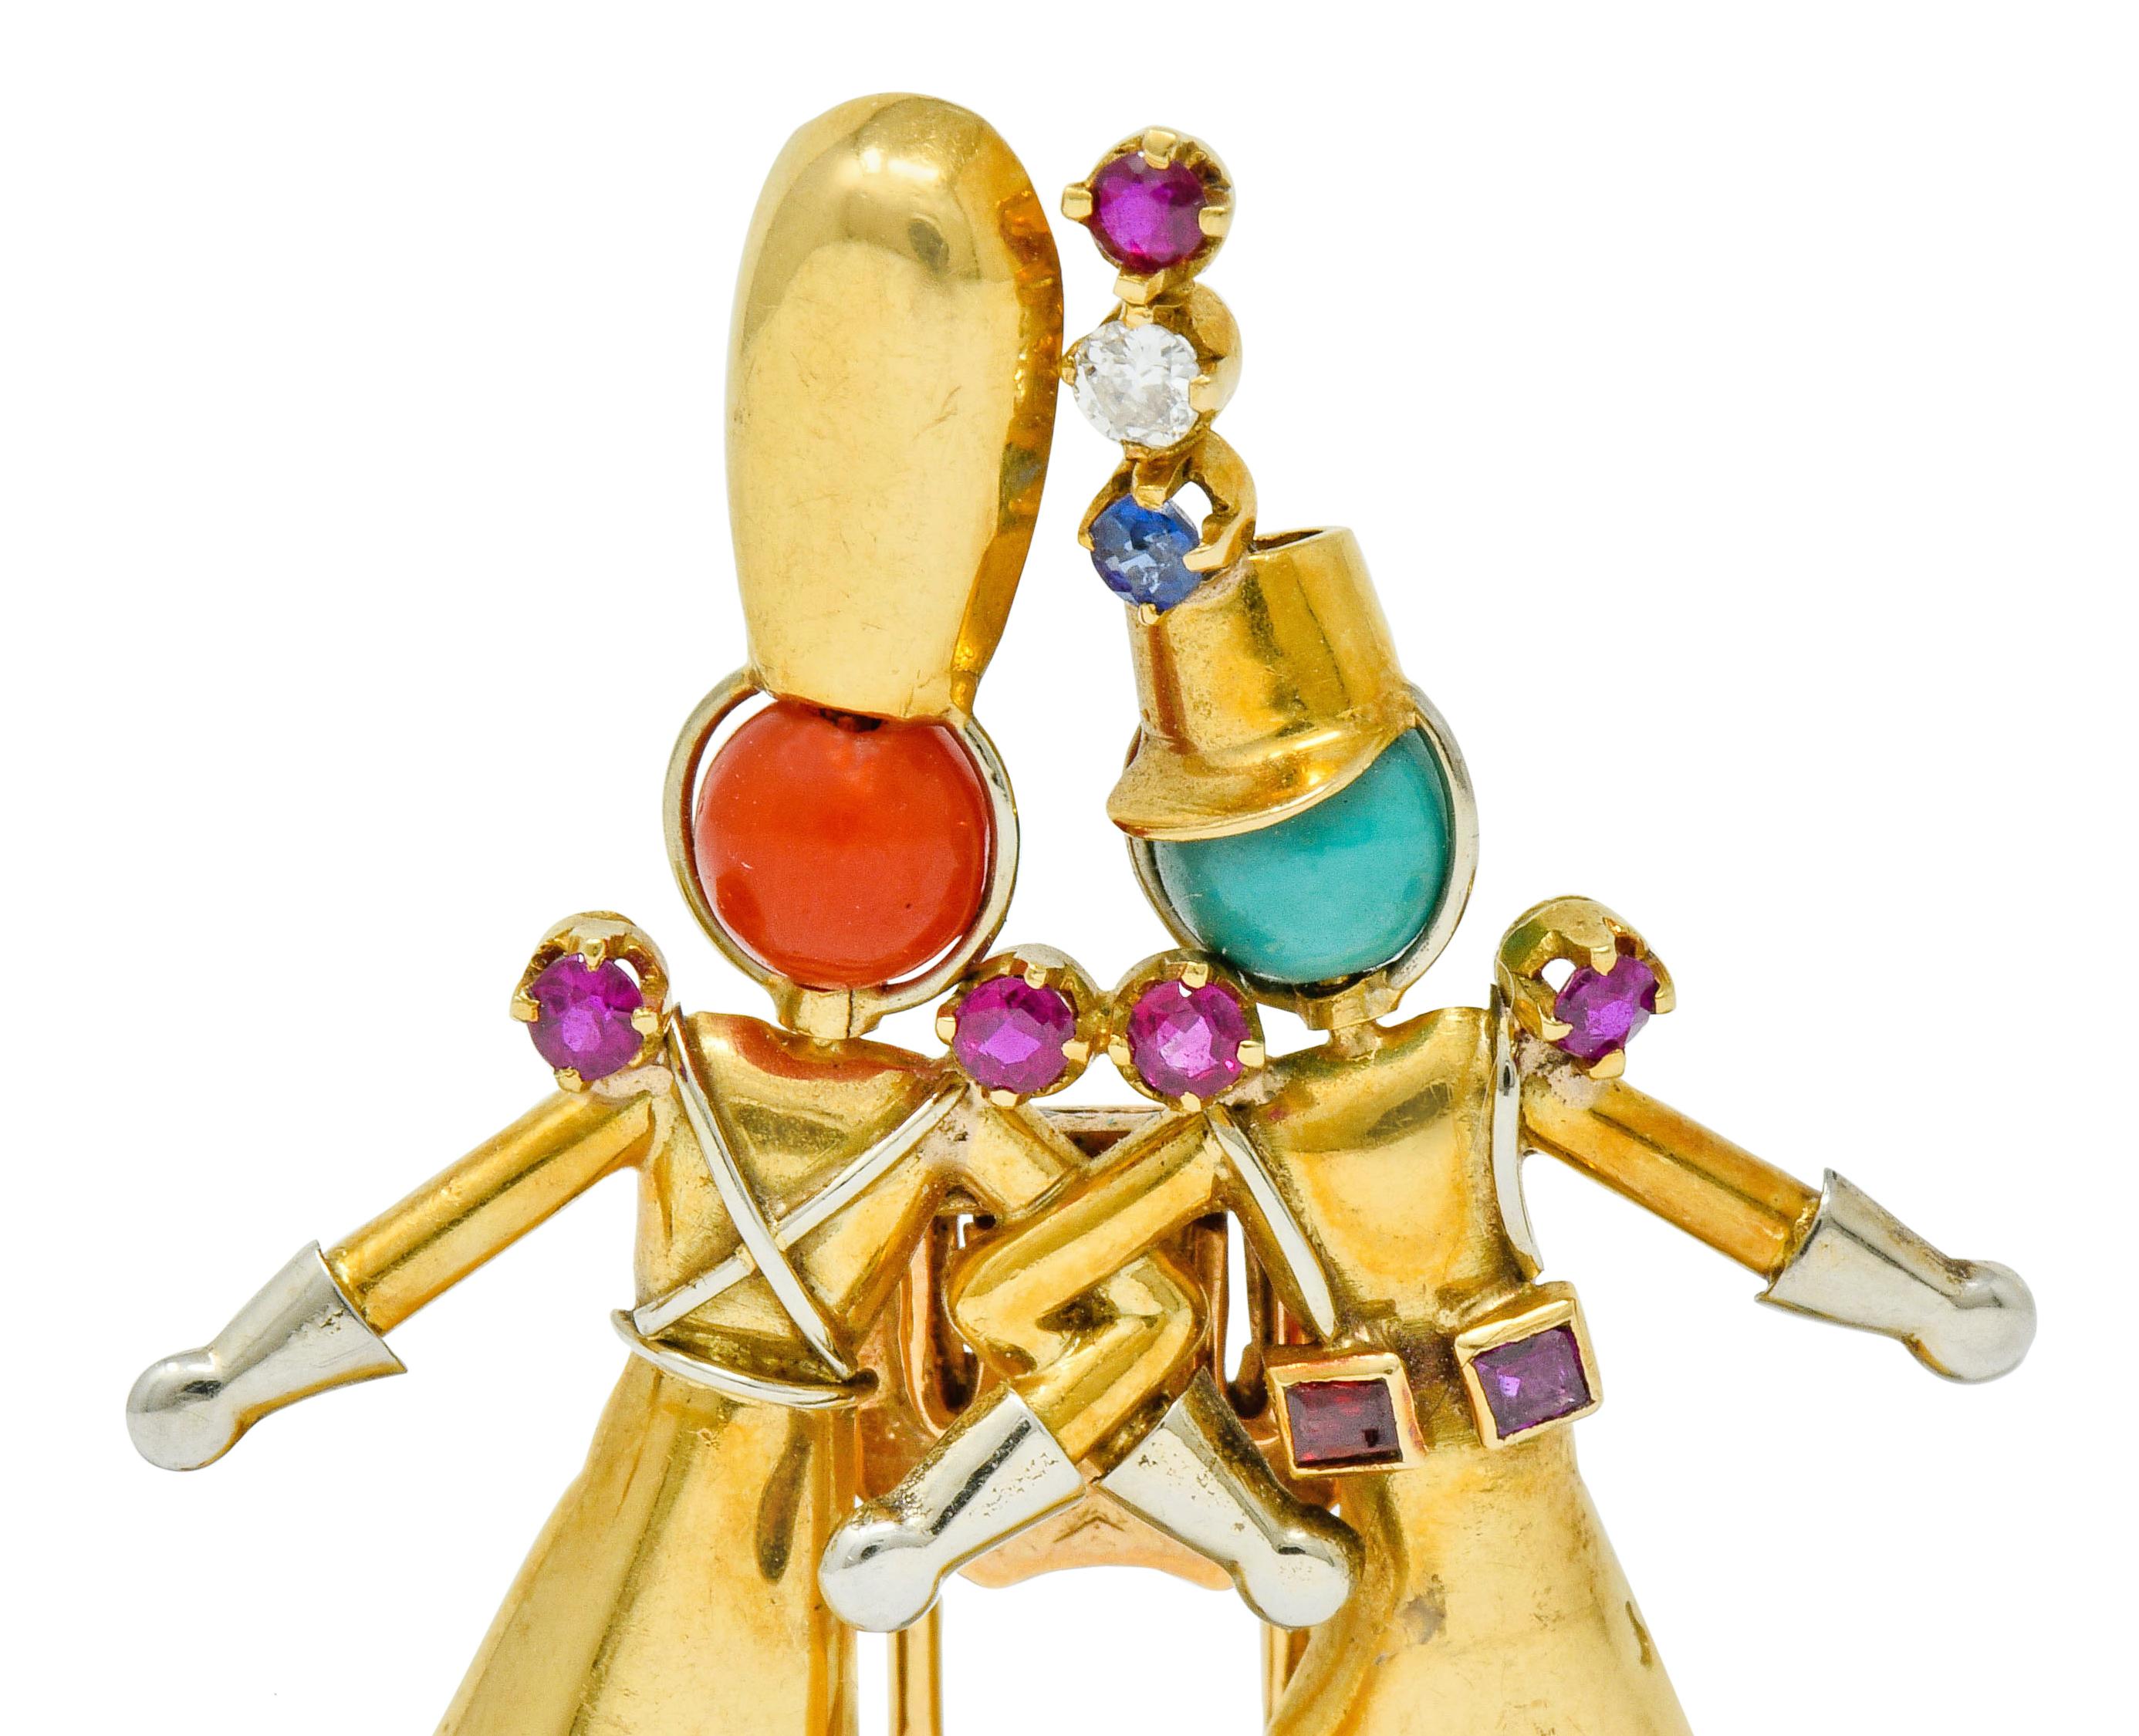 Brooch is designed as two jovial soldiers joined arm in arm dressed in polished gold uniforms with platinum details

Heads and shoes are comprised of round coral and turquoise, opaque and brightly colored with very good polish

Accented by diamond,